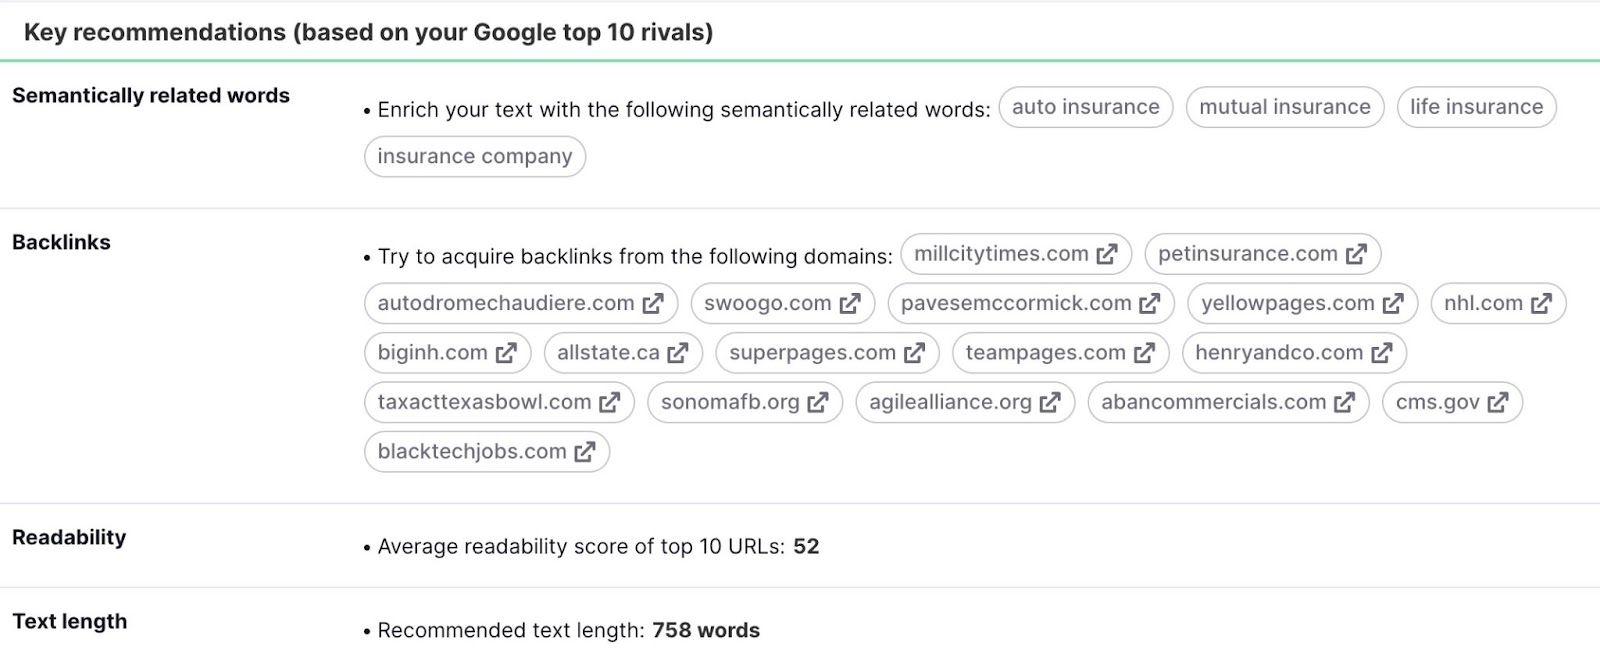 Key recommendations (based on your Google top 10 rivals" section in SEO Content Template